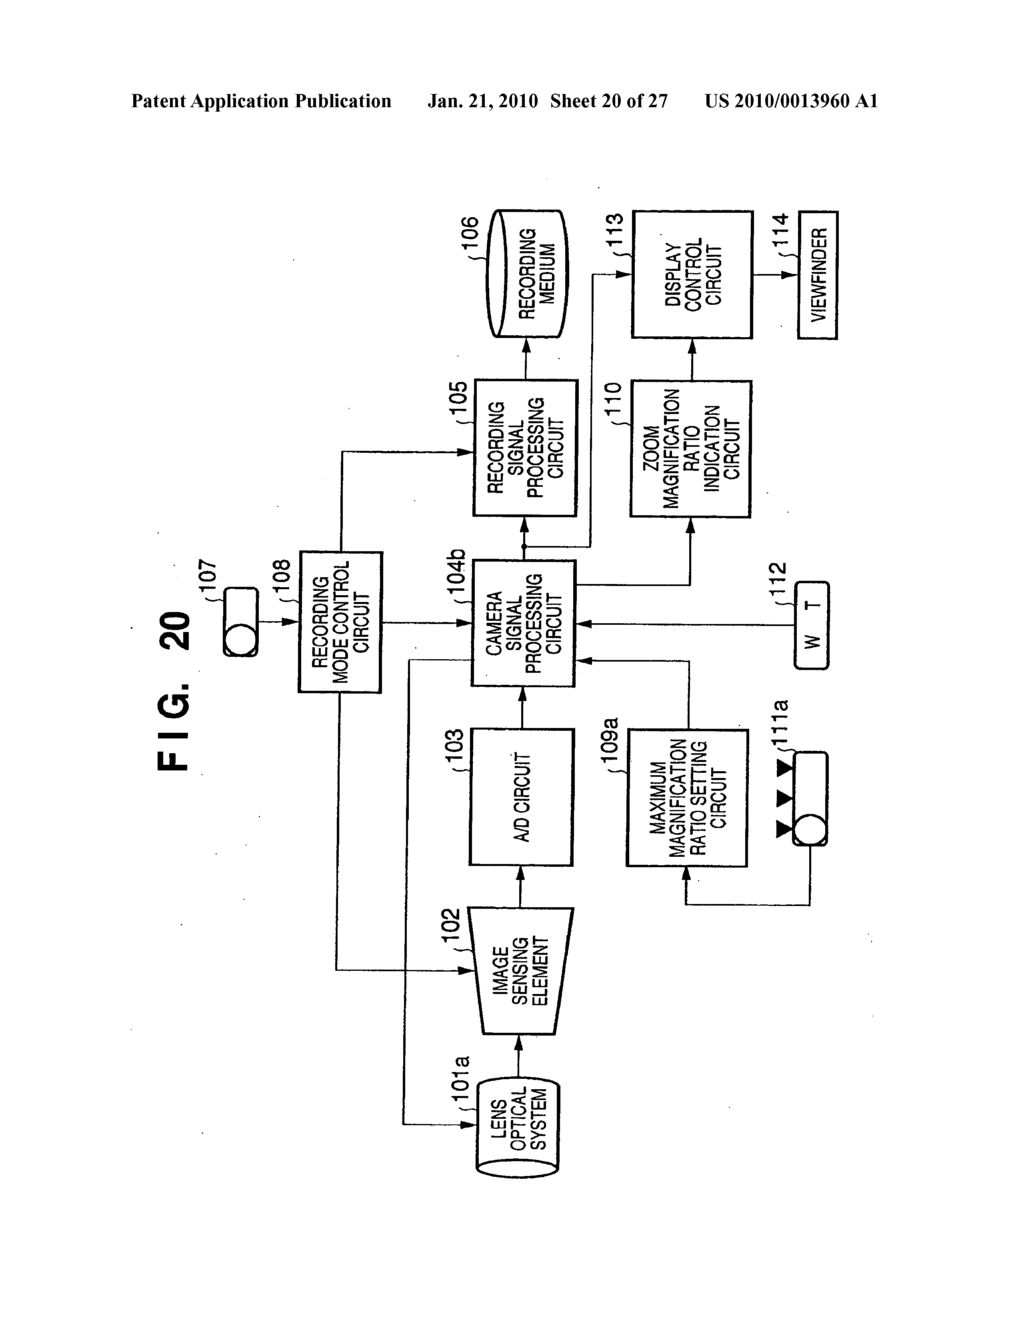 SIGNAL PROCESSING APPARATUS AND IMAGE DATA GENERATION APPARATUS WITH ELECTRONIC REDUCTION AND ENLARGEMENT SIGNAL PROCESSING CAPABILITIES - diagram, schematic, and image 21